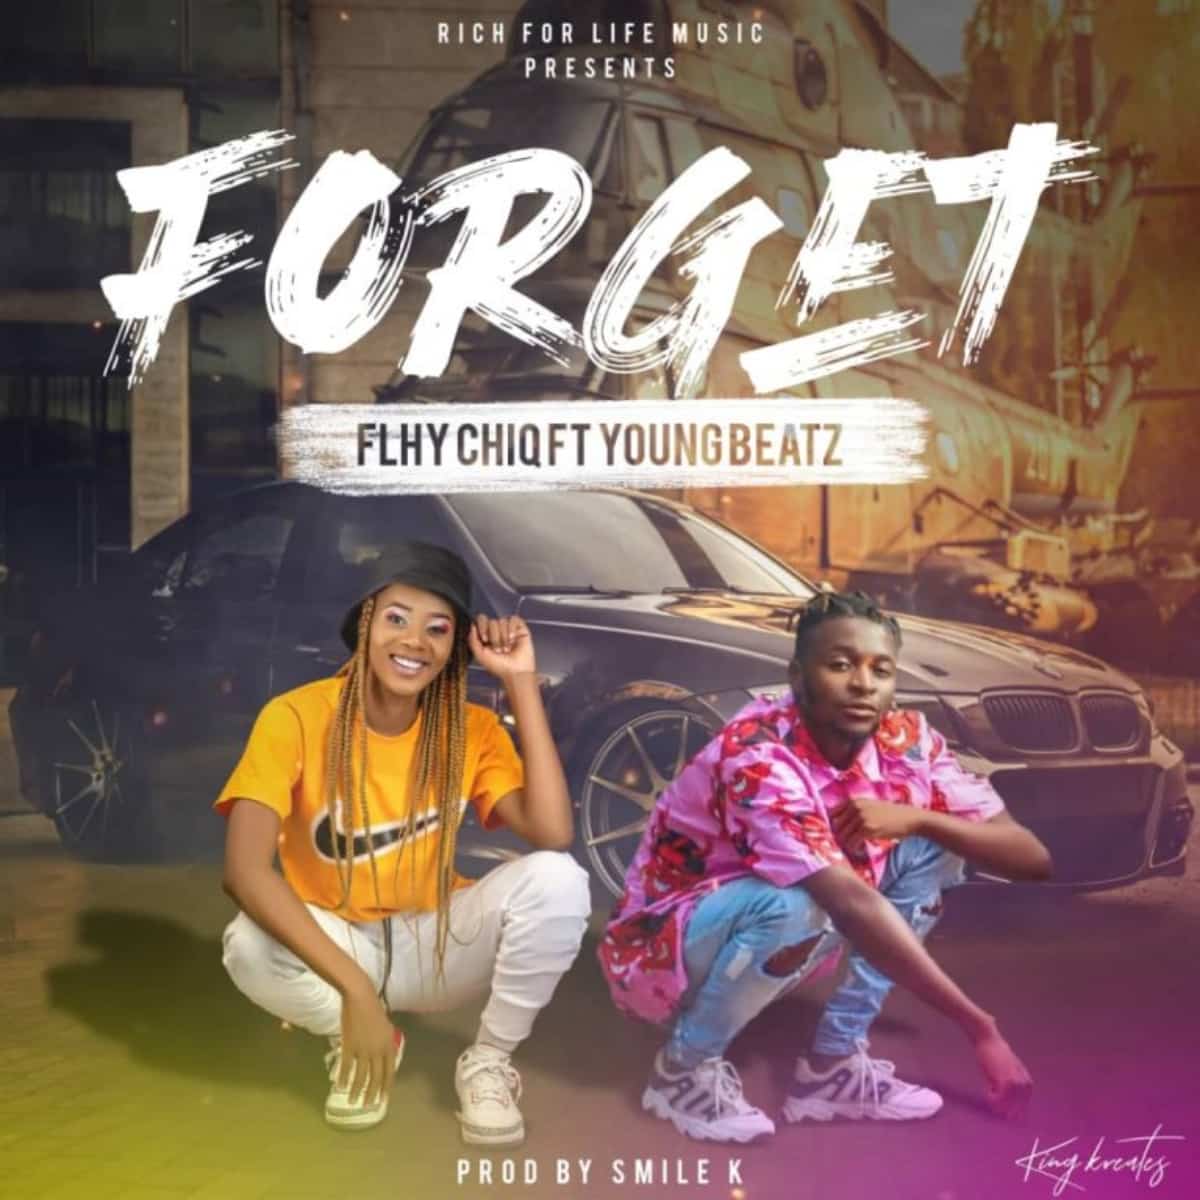 DOWNLOAD: Flhy chiq Shaanah Ft Youngbeatz – “Forget” Mp3